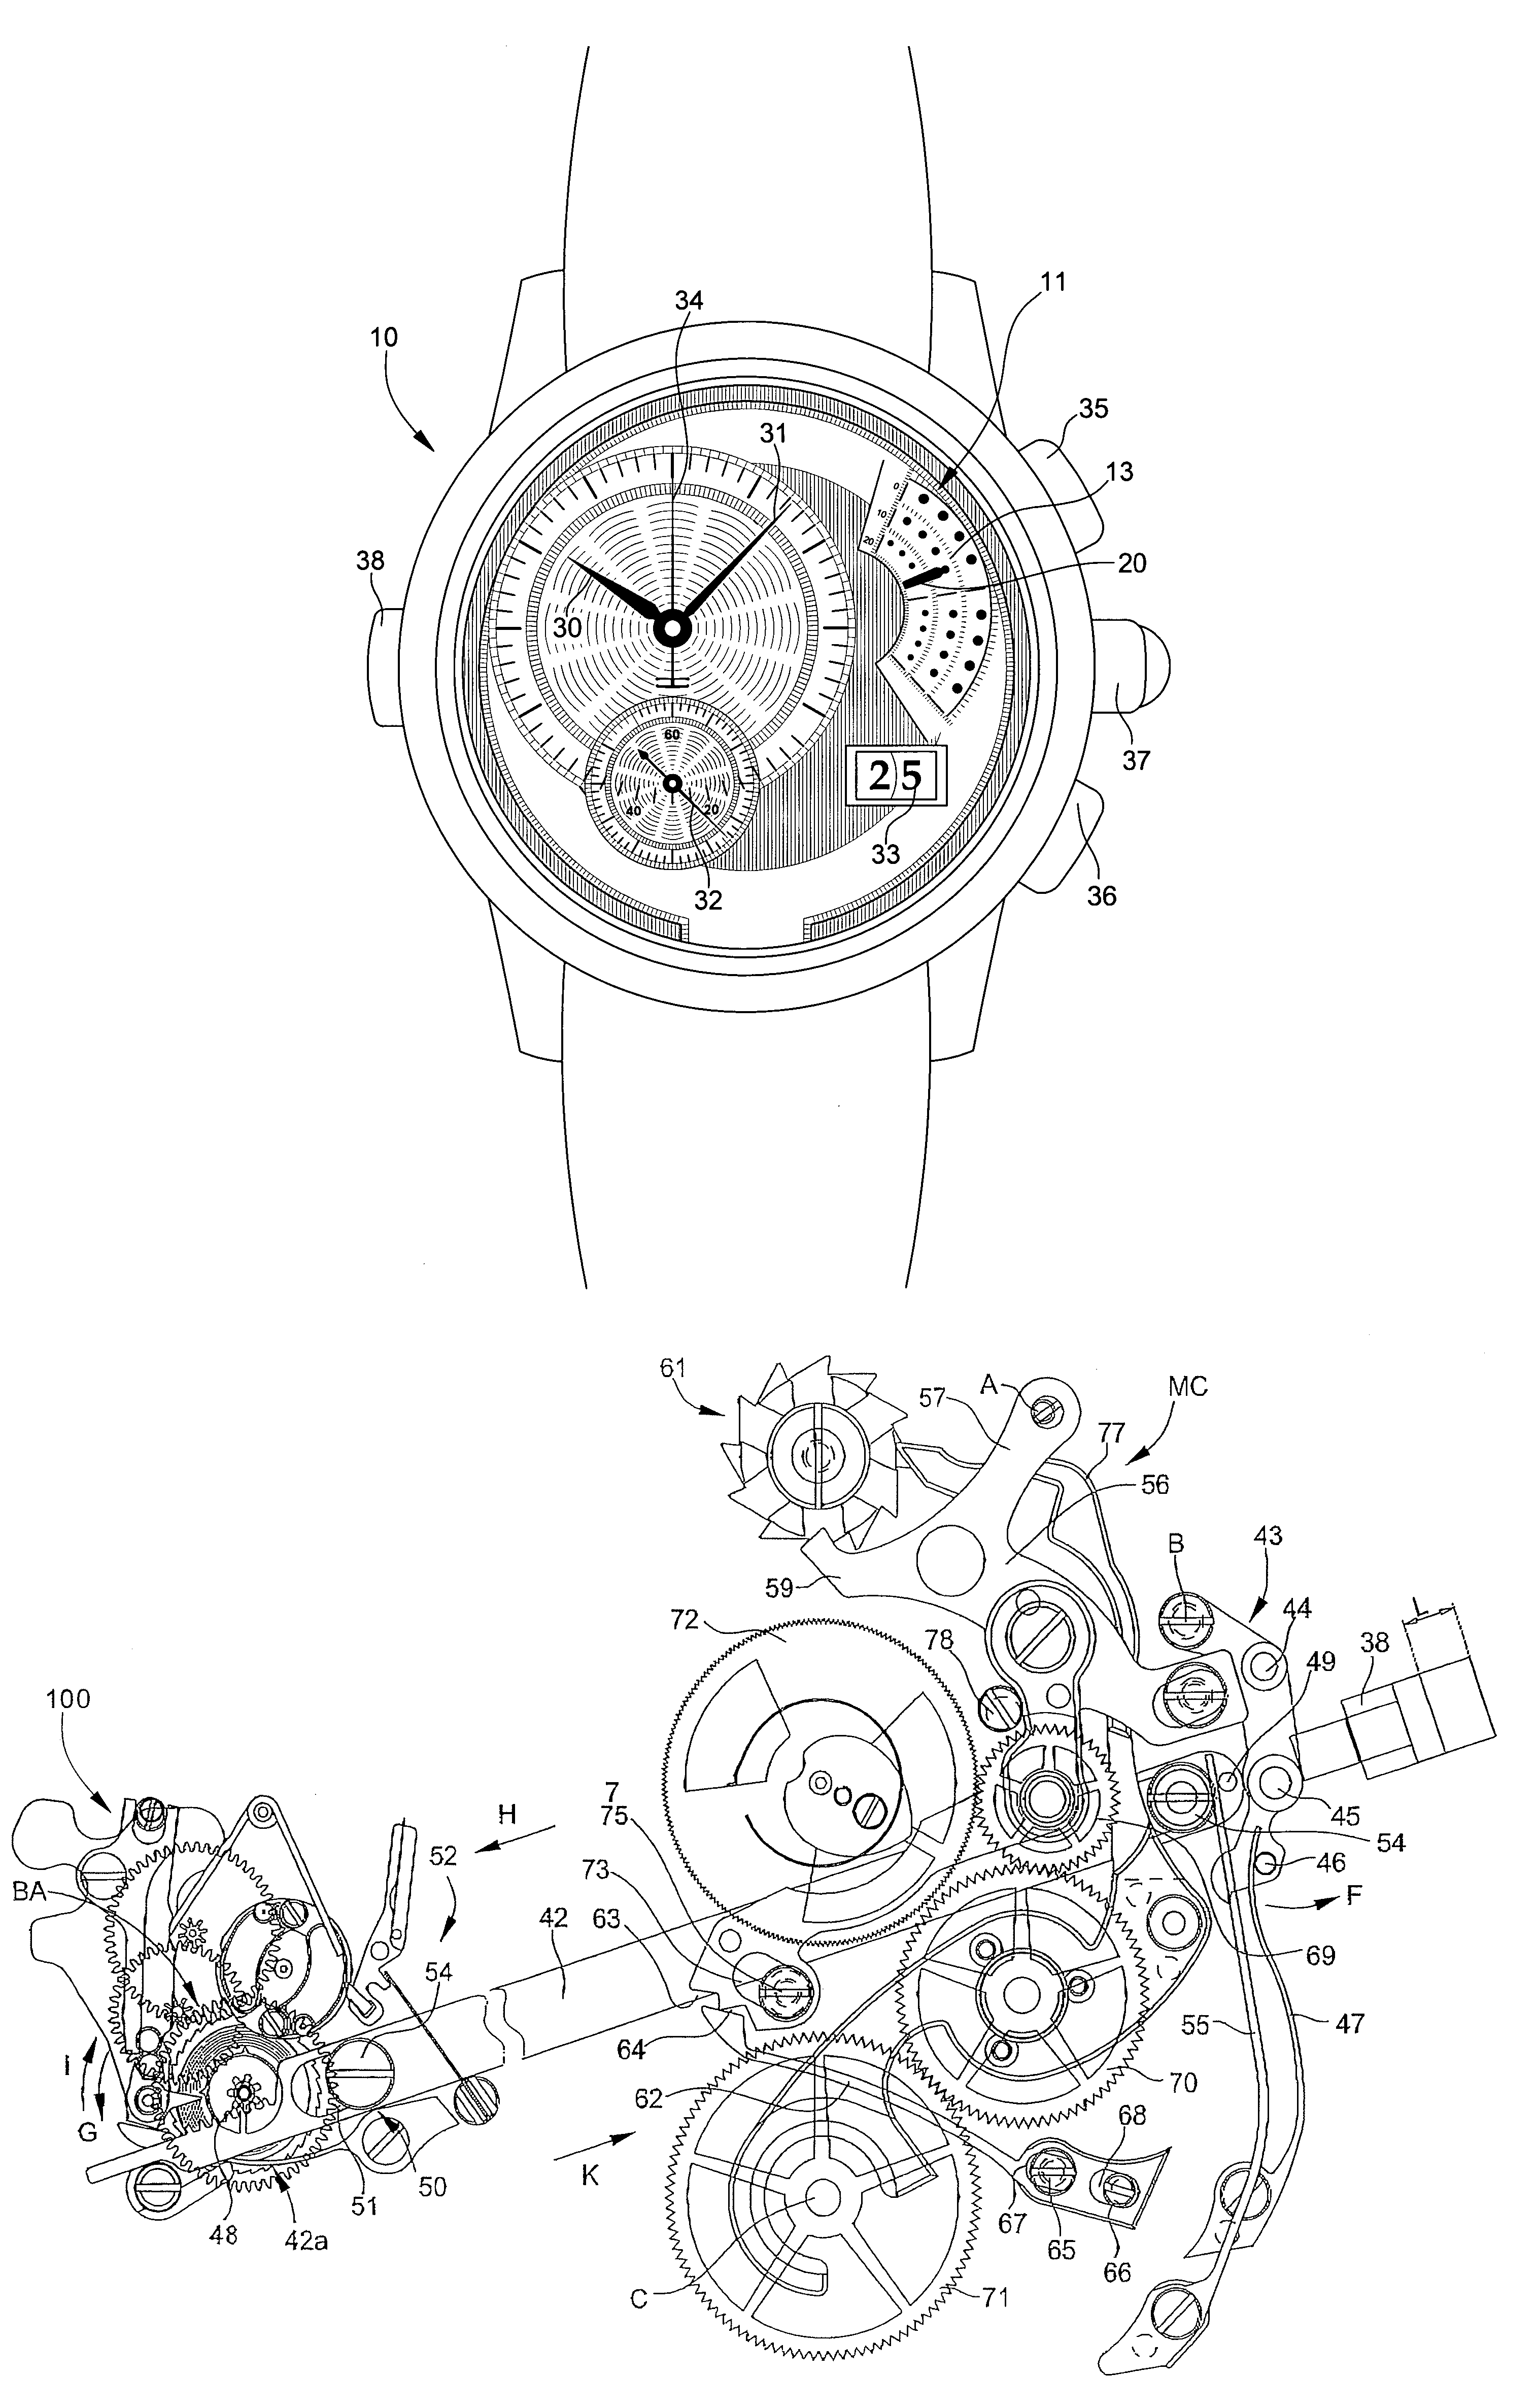 Timepiece including a mechanism for triggering a time-related function and simultaneous winding of a barrel spring